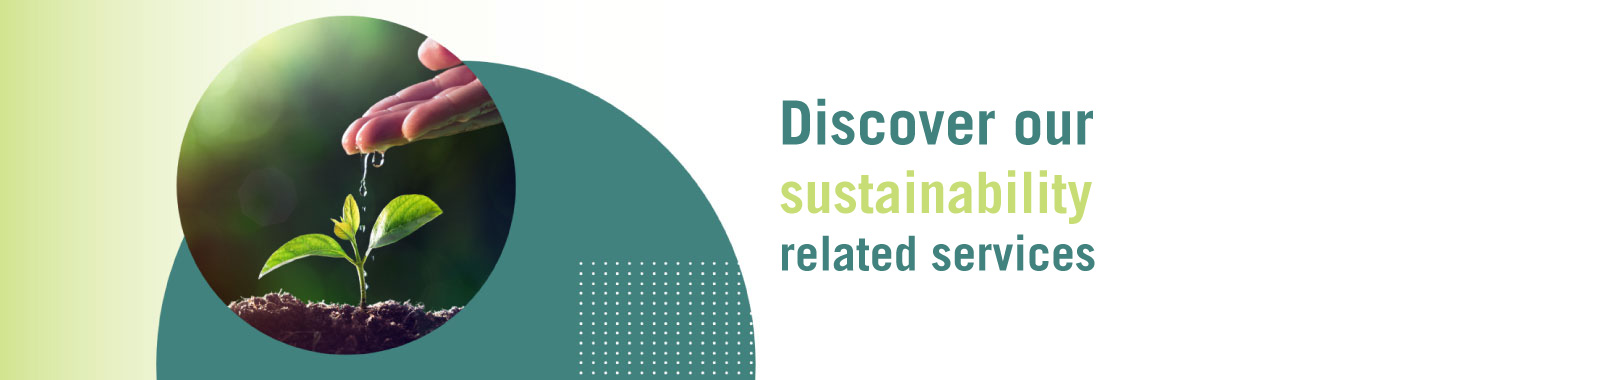 sustainability related services